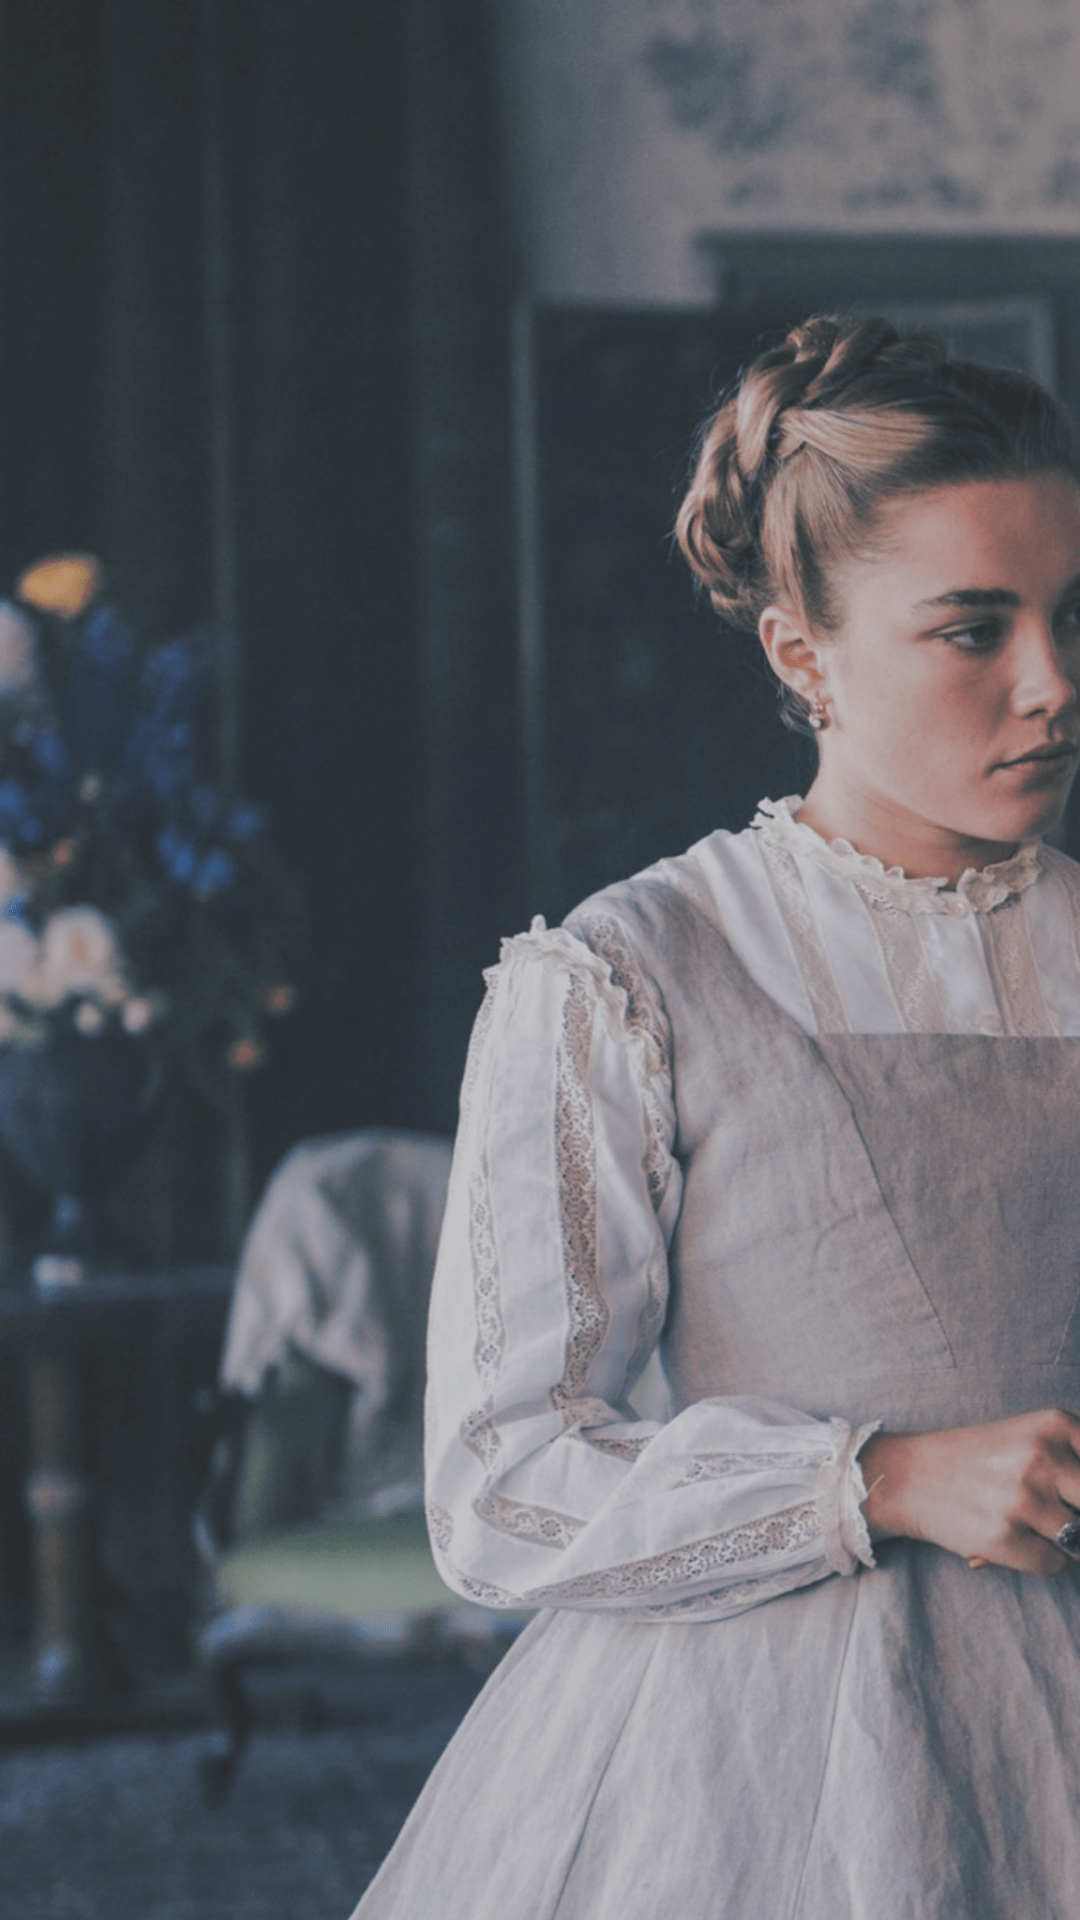 A woman in a white dress holding a book. - Florence Pugh